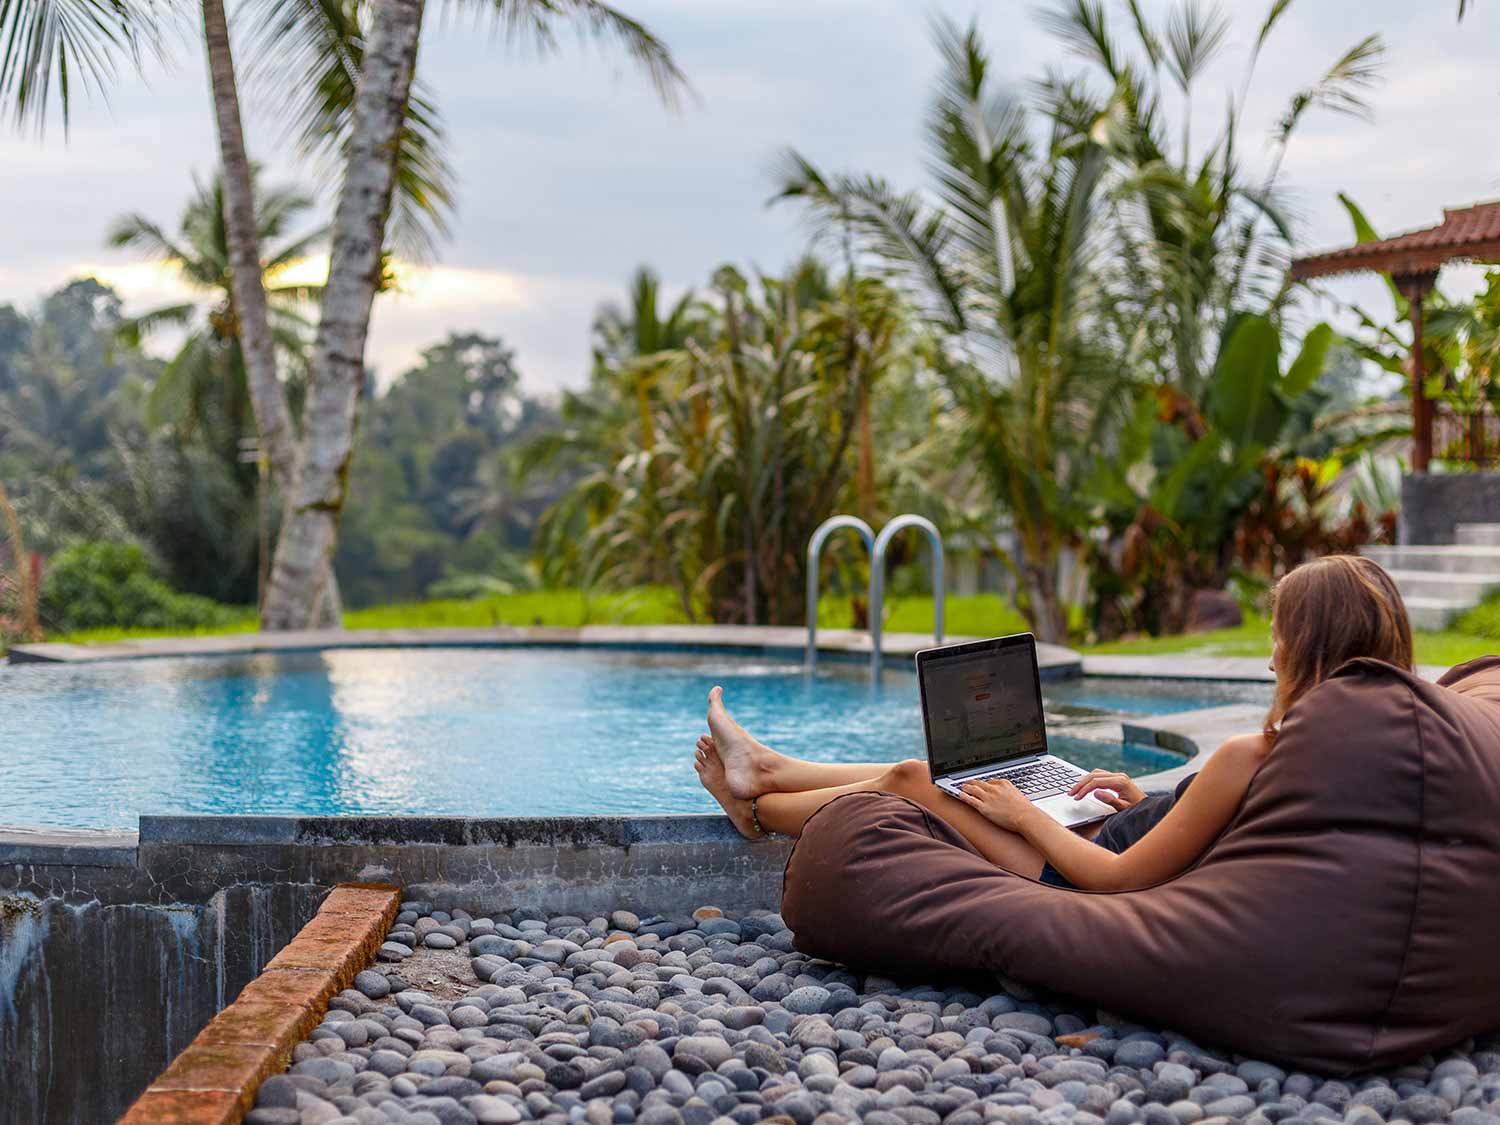 Person using a laptop by a swimming pool